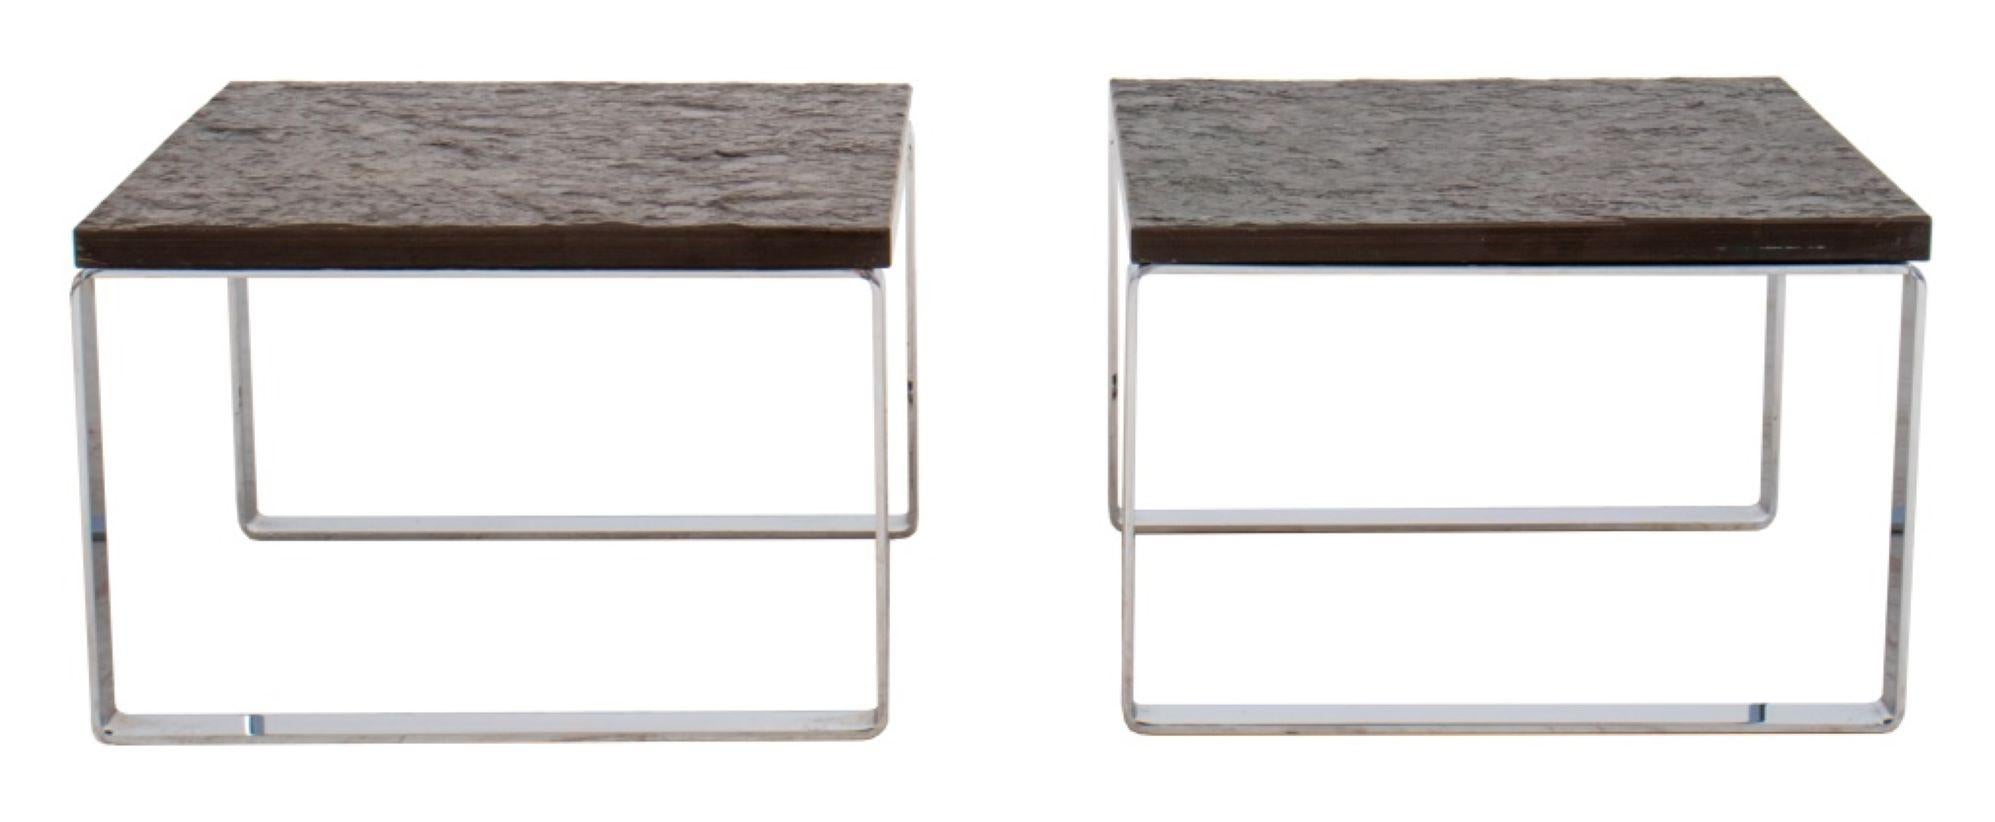 Peter Draenert (German, 1937-2005) Modern design pair of Model 1062 end tables, circa 1970s, with chromed legs and slate stone tops with textured surface, in the manner of Hans Eichenberger (Swiss, b. 1926). 16